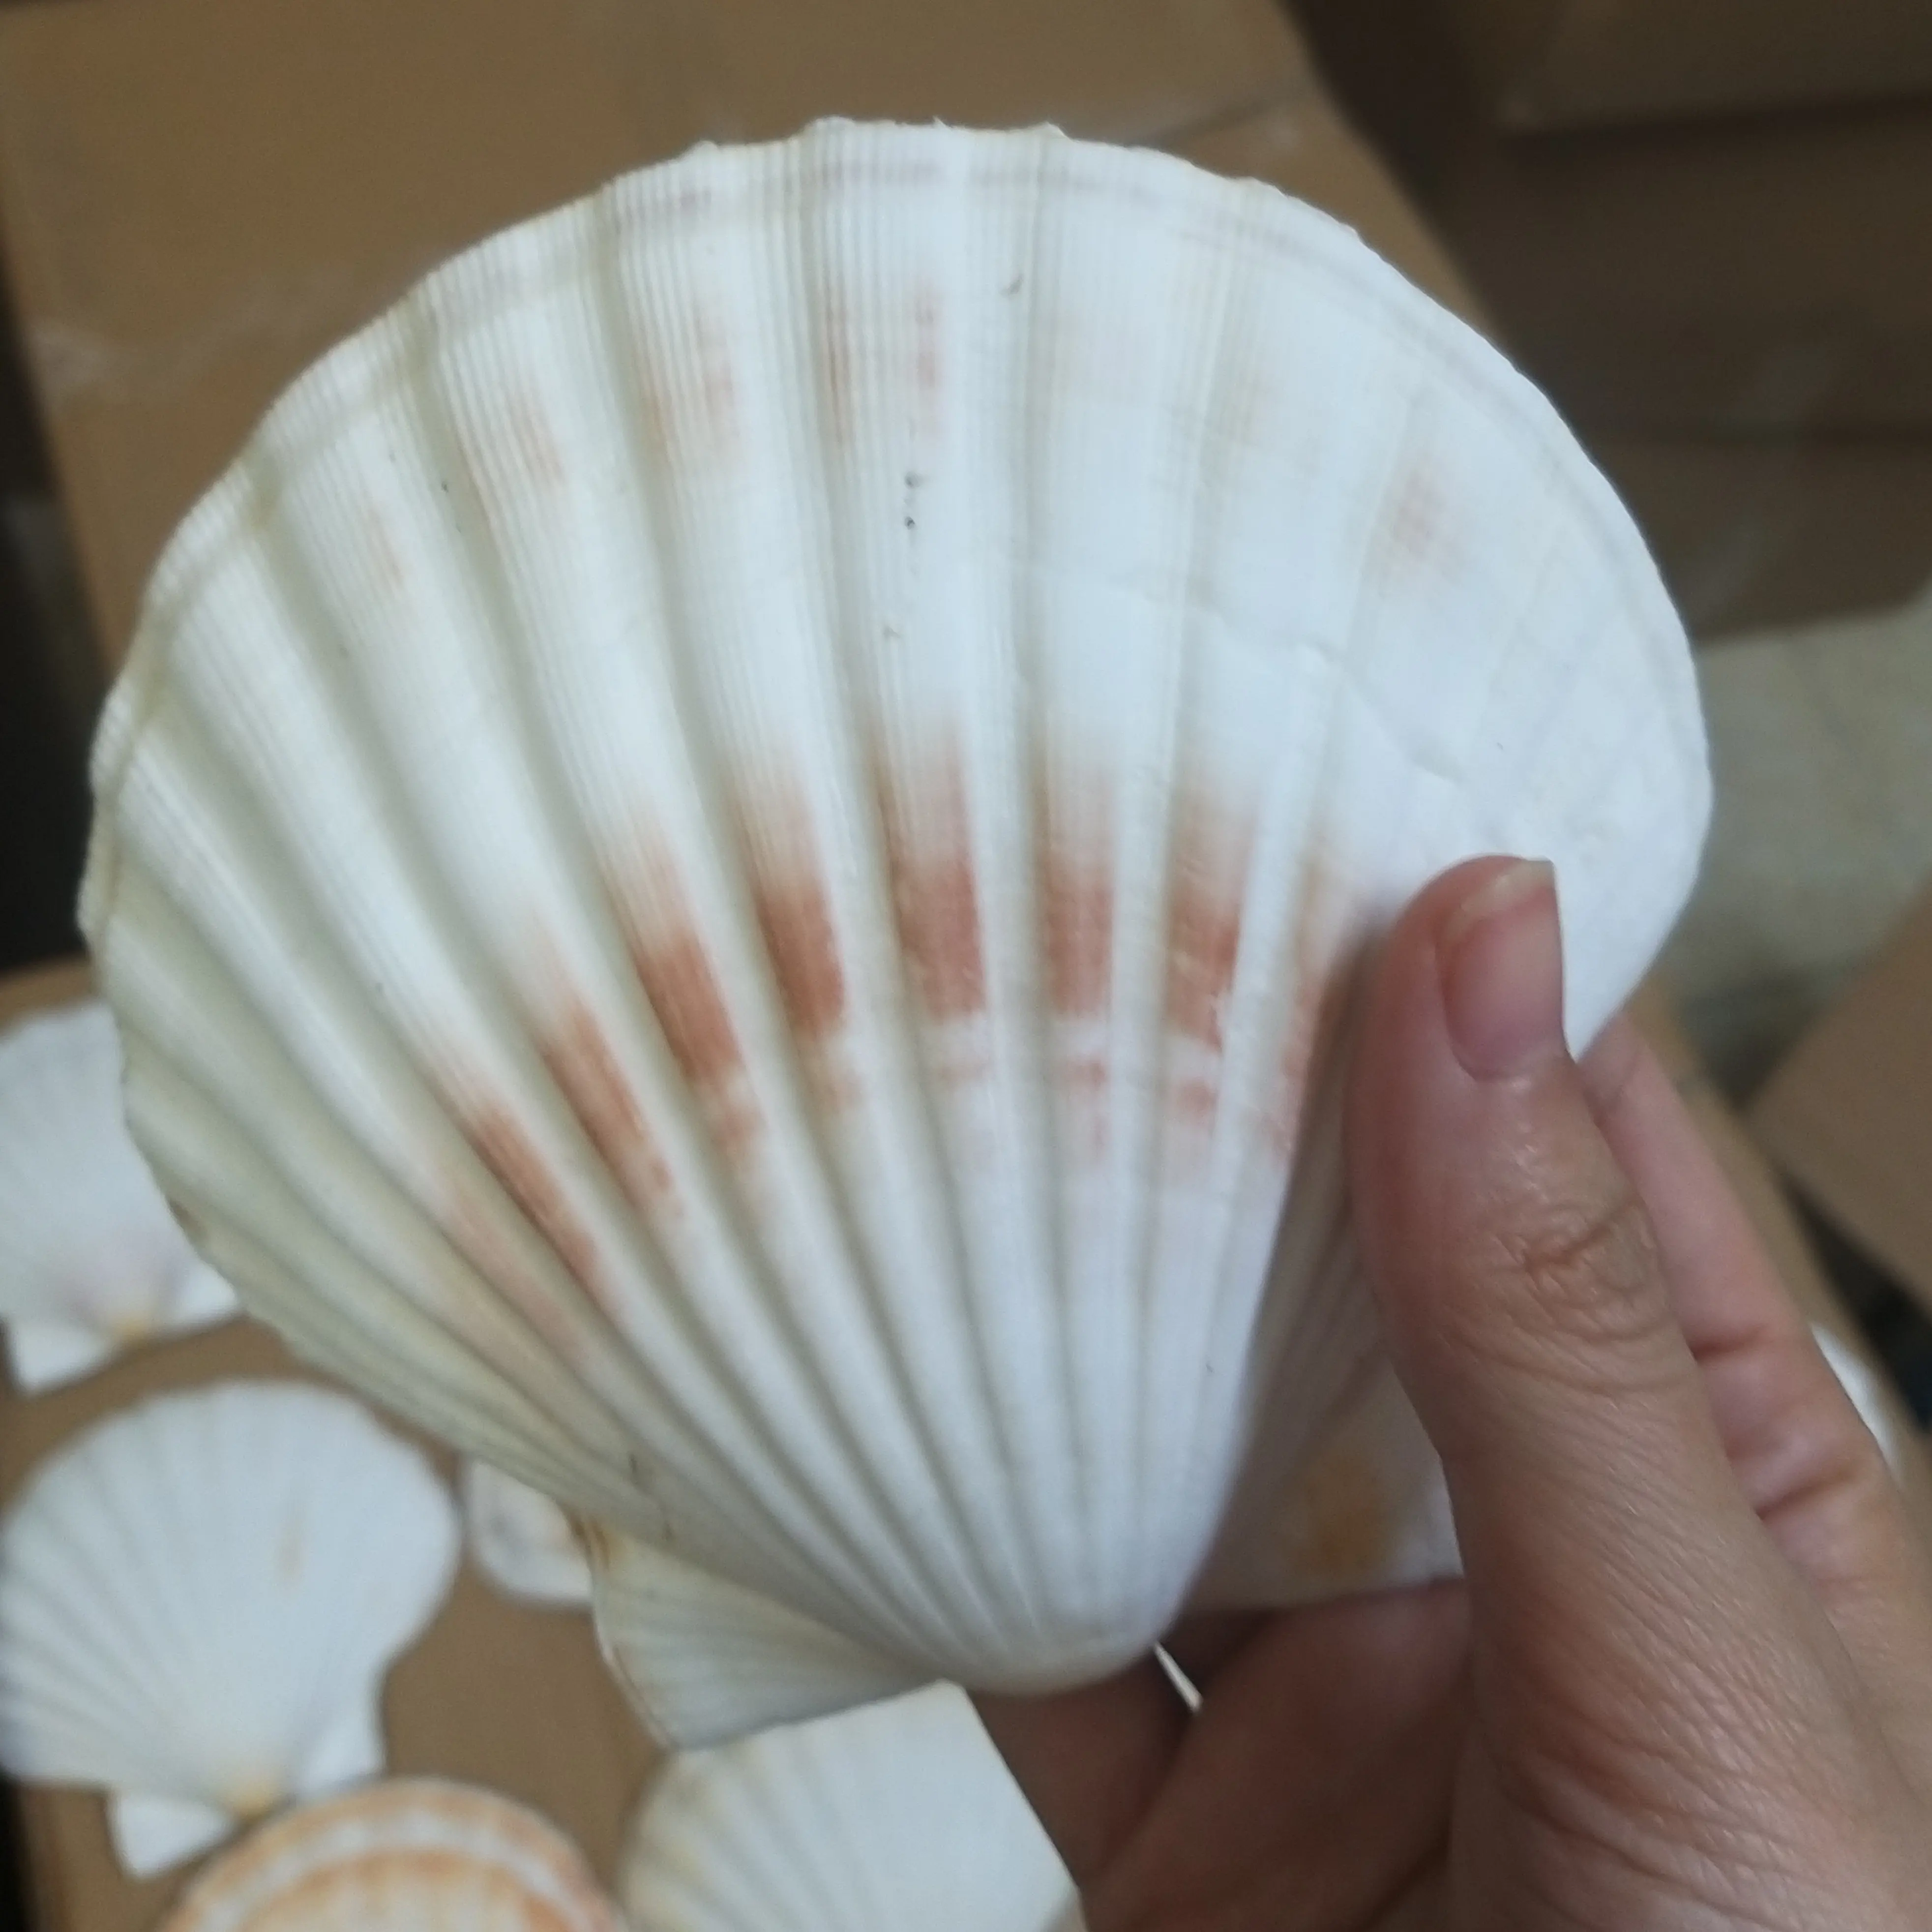 Competitive Price Scallop Sea Shells From Vietnam with High Quality - Export Scallop Sea Shells